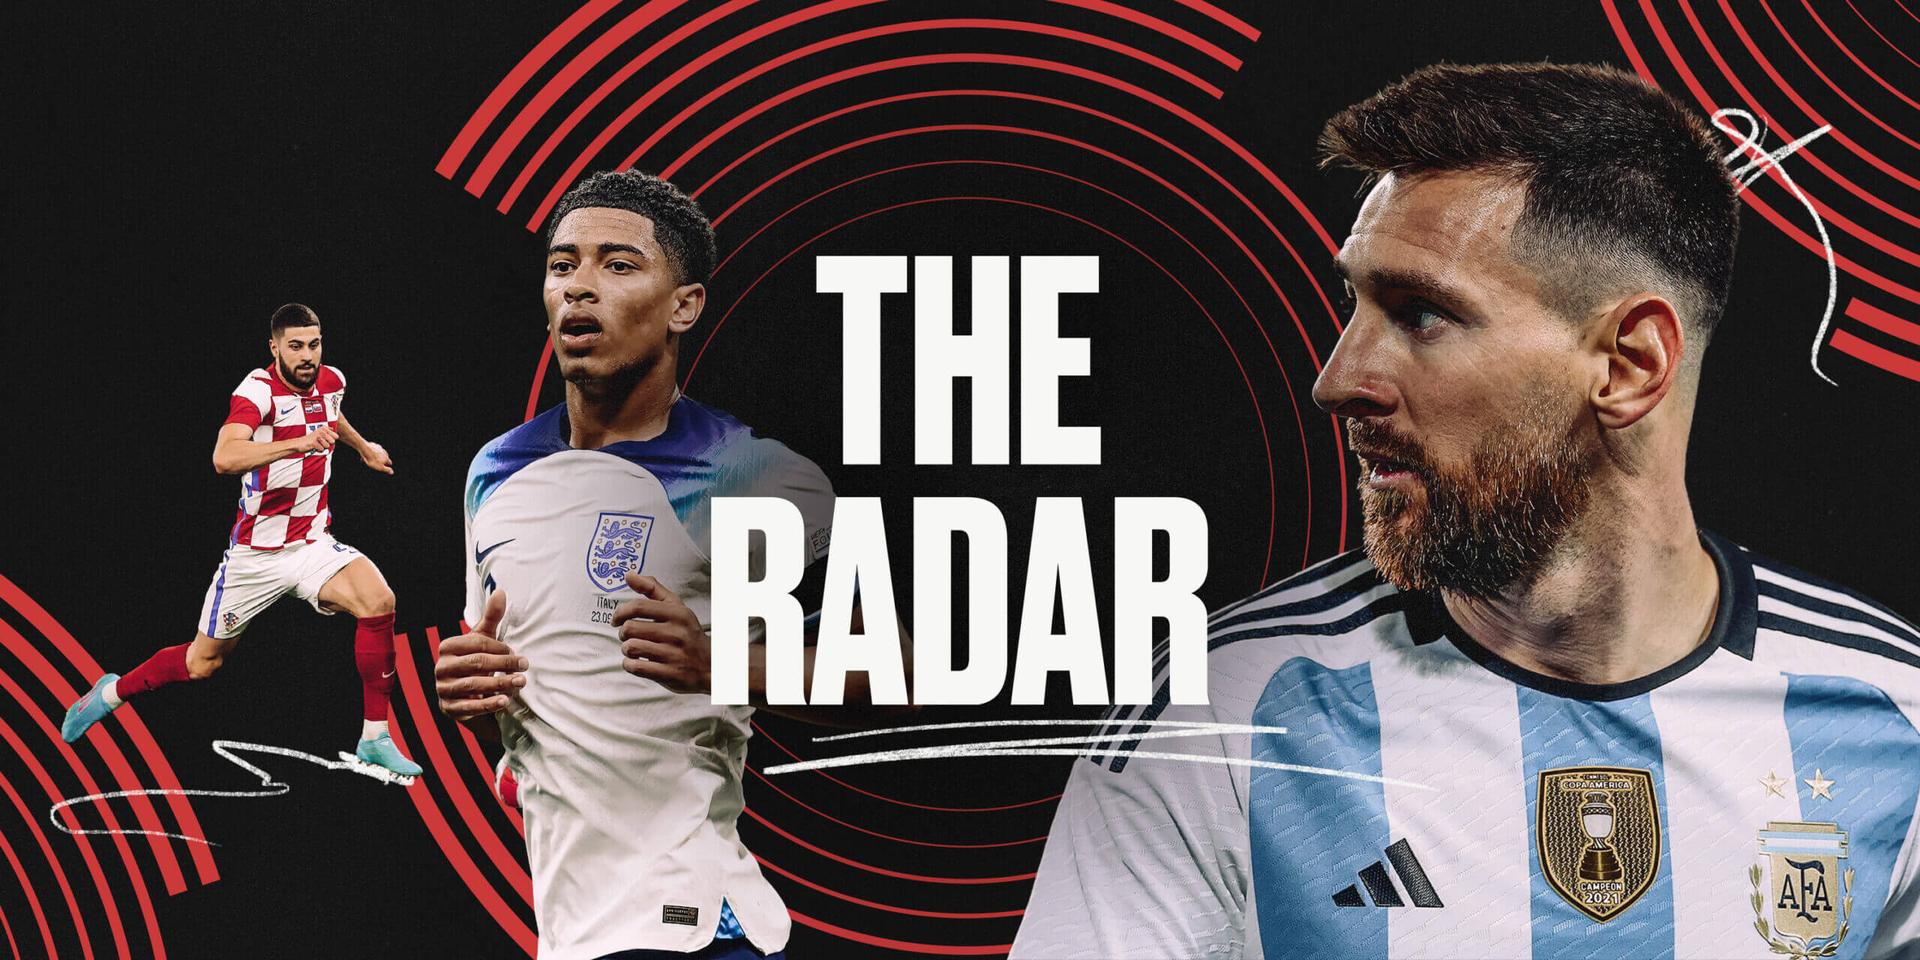 The Radar - The Athletic's 2022 World Cup scouting guide